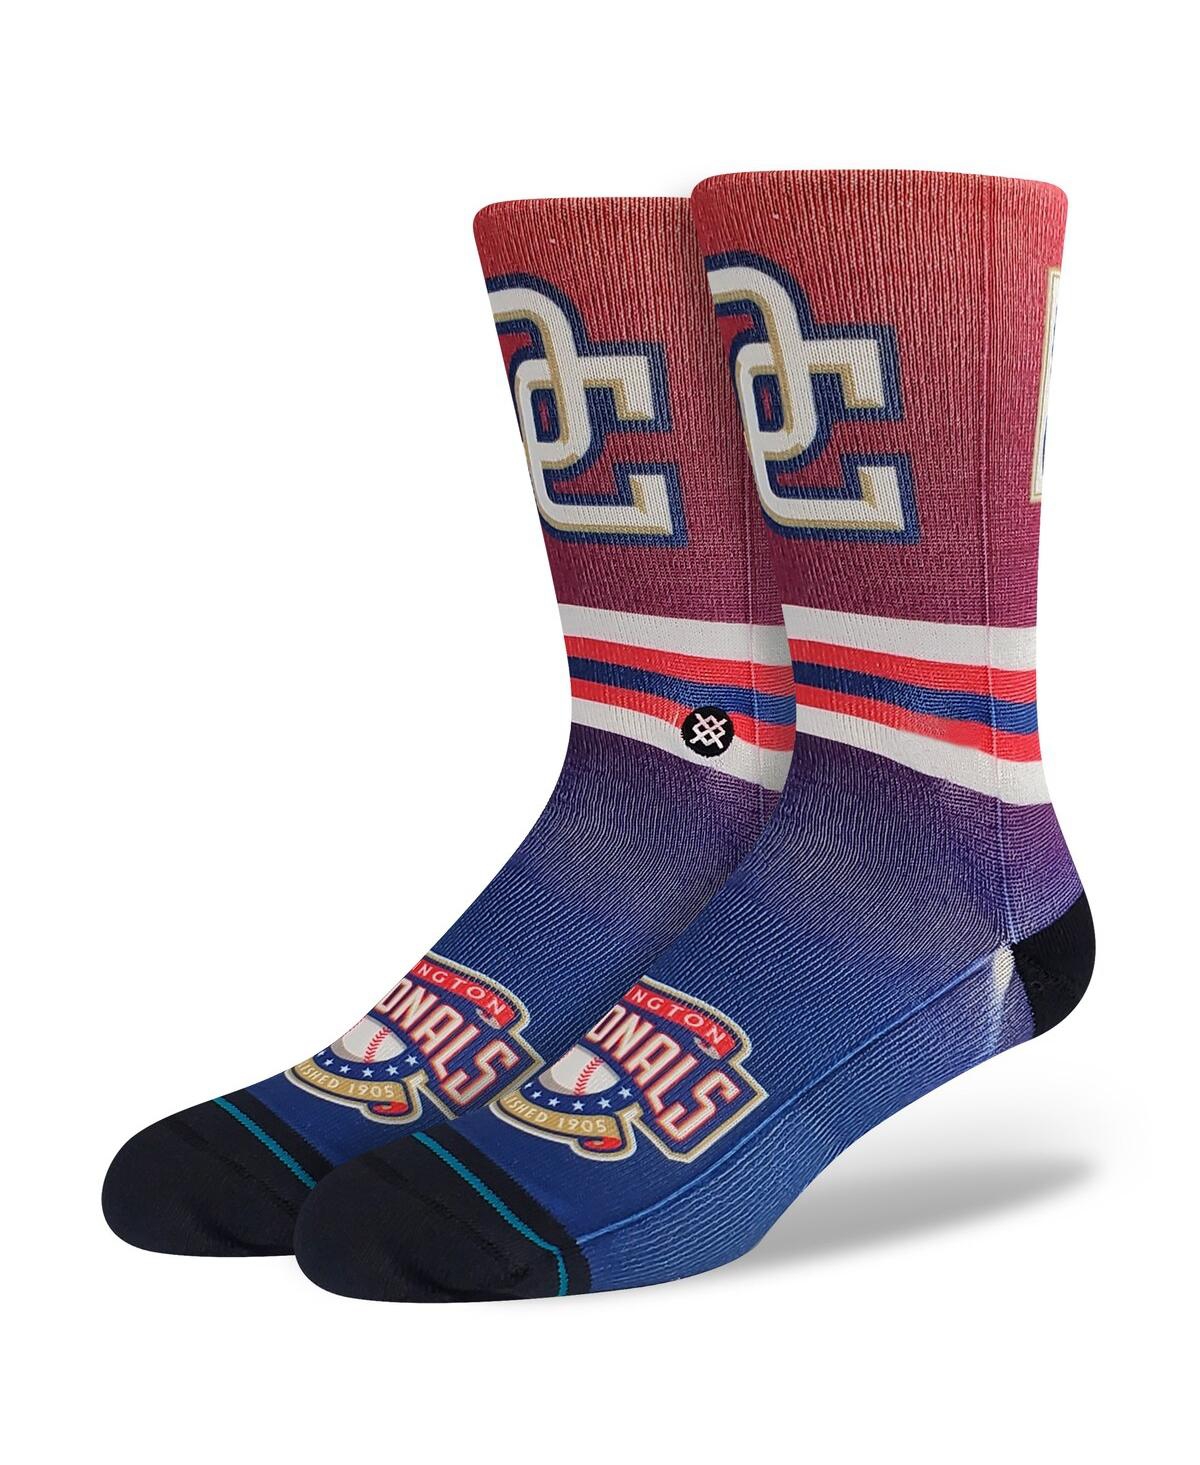 Men's Stance Washington Nationals Cooperstown Collection Crew Socks - Multi